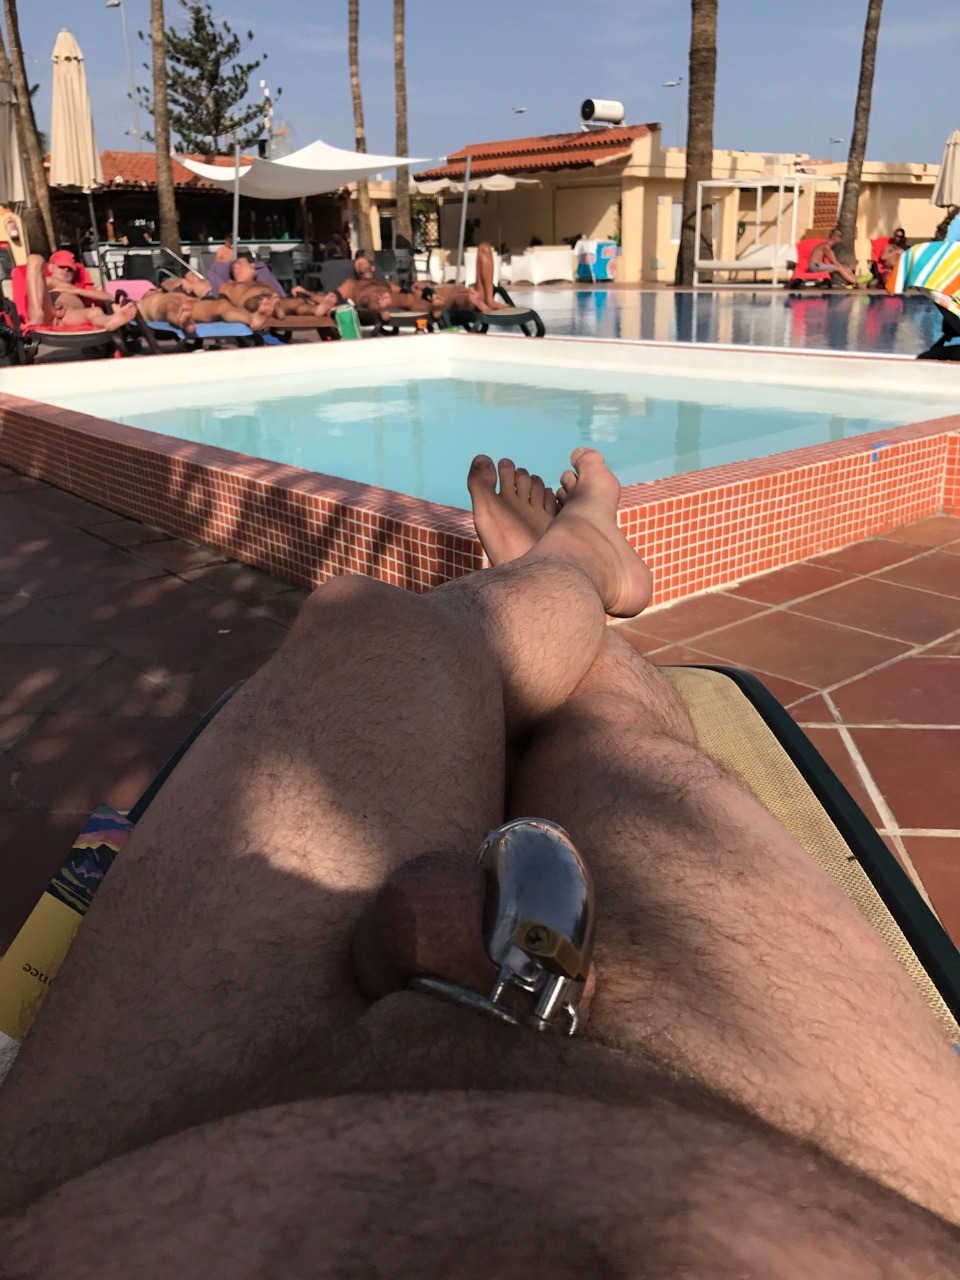 public chastity by the pool